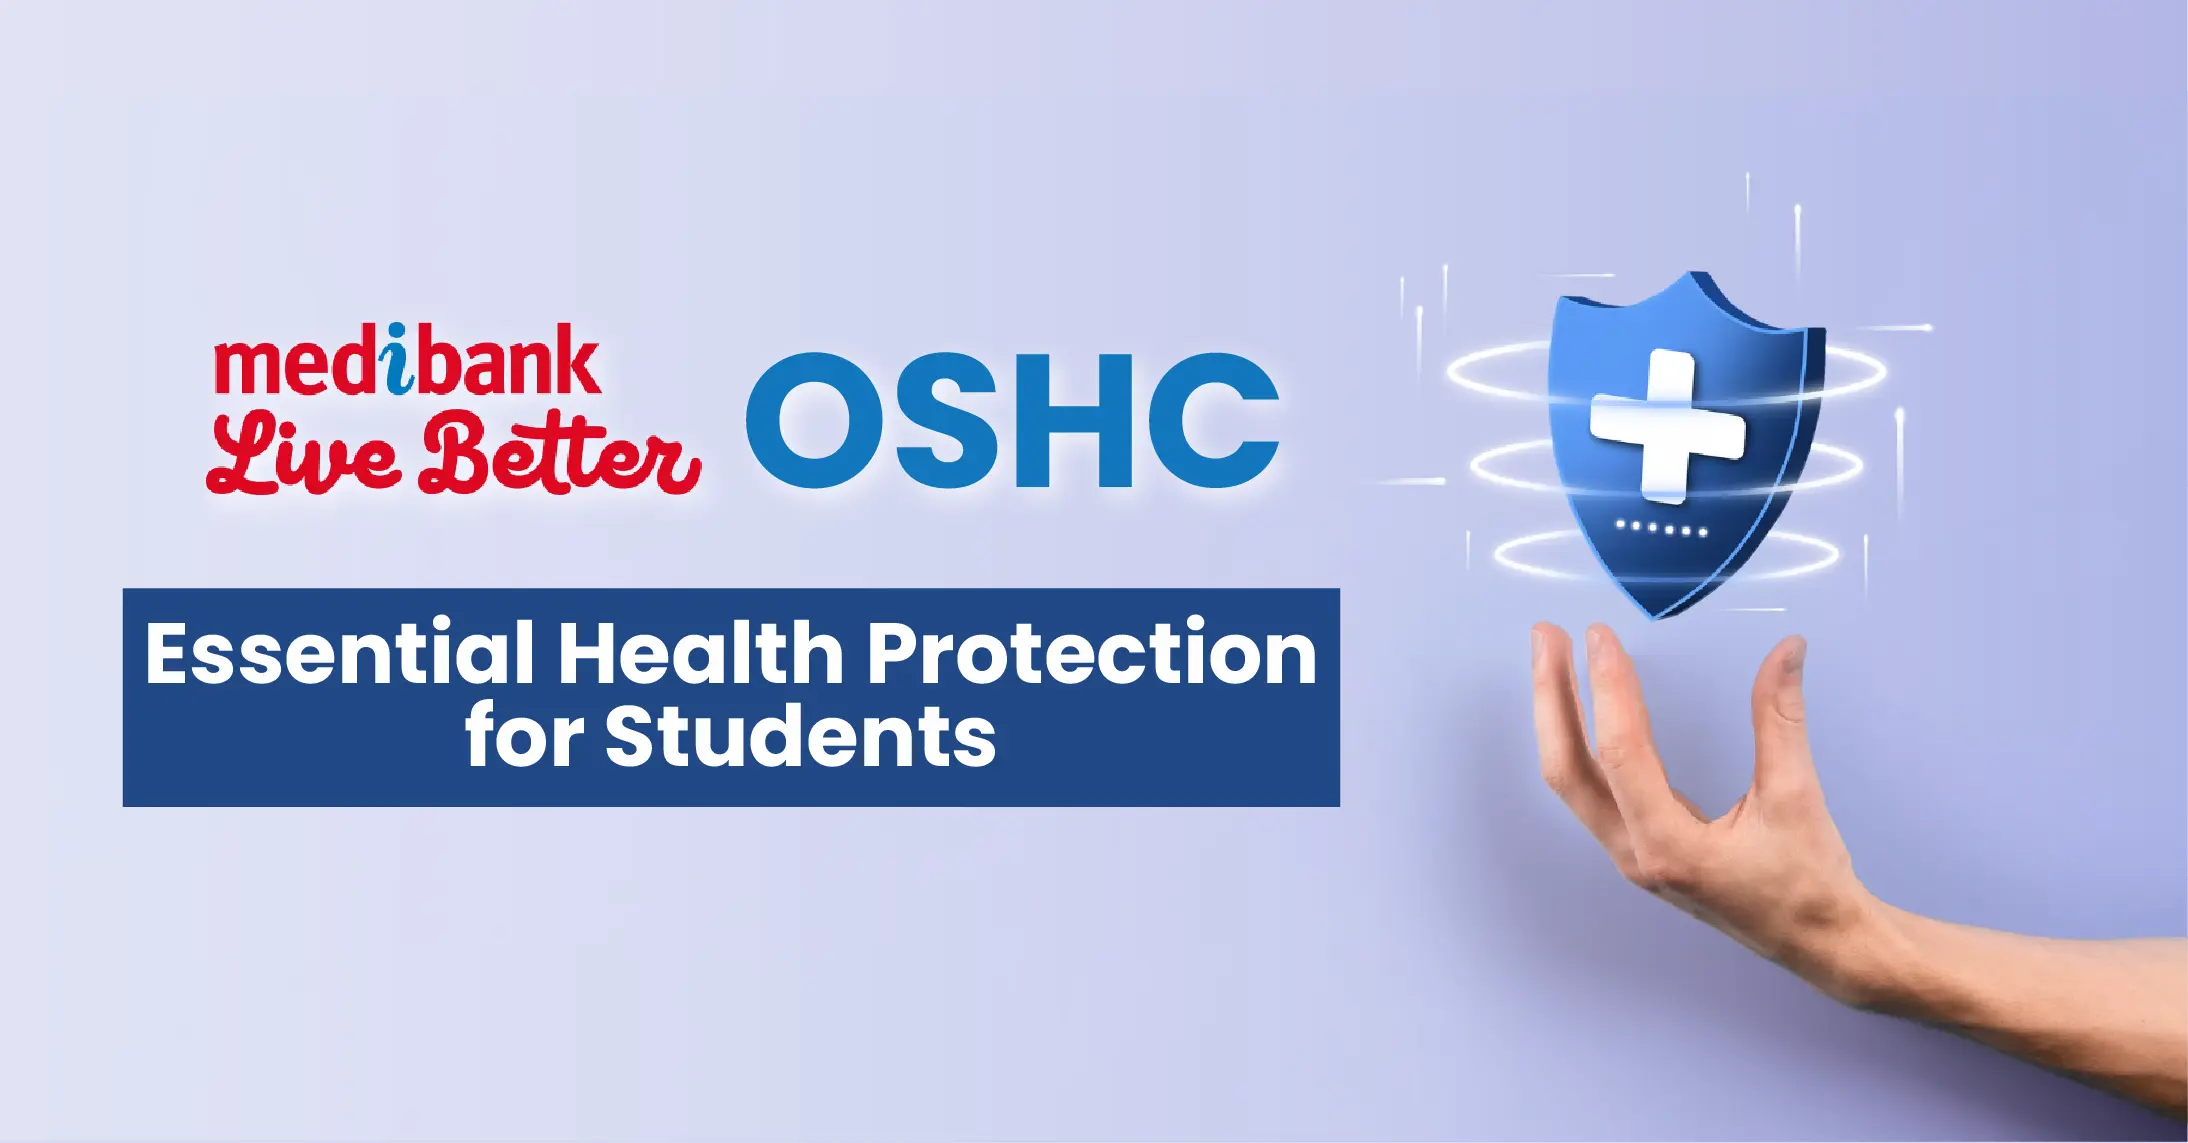 Medibank OSHC: Essential Health Protection for Students